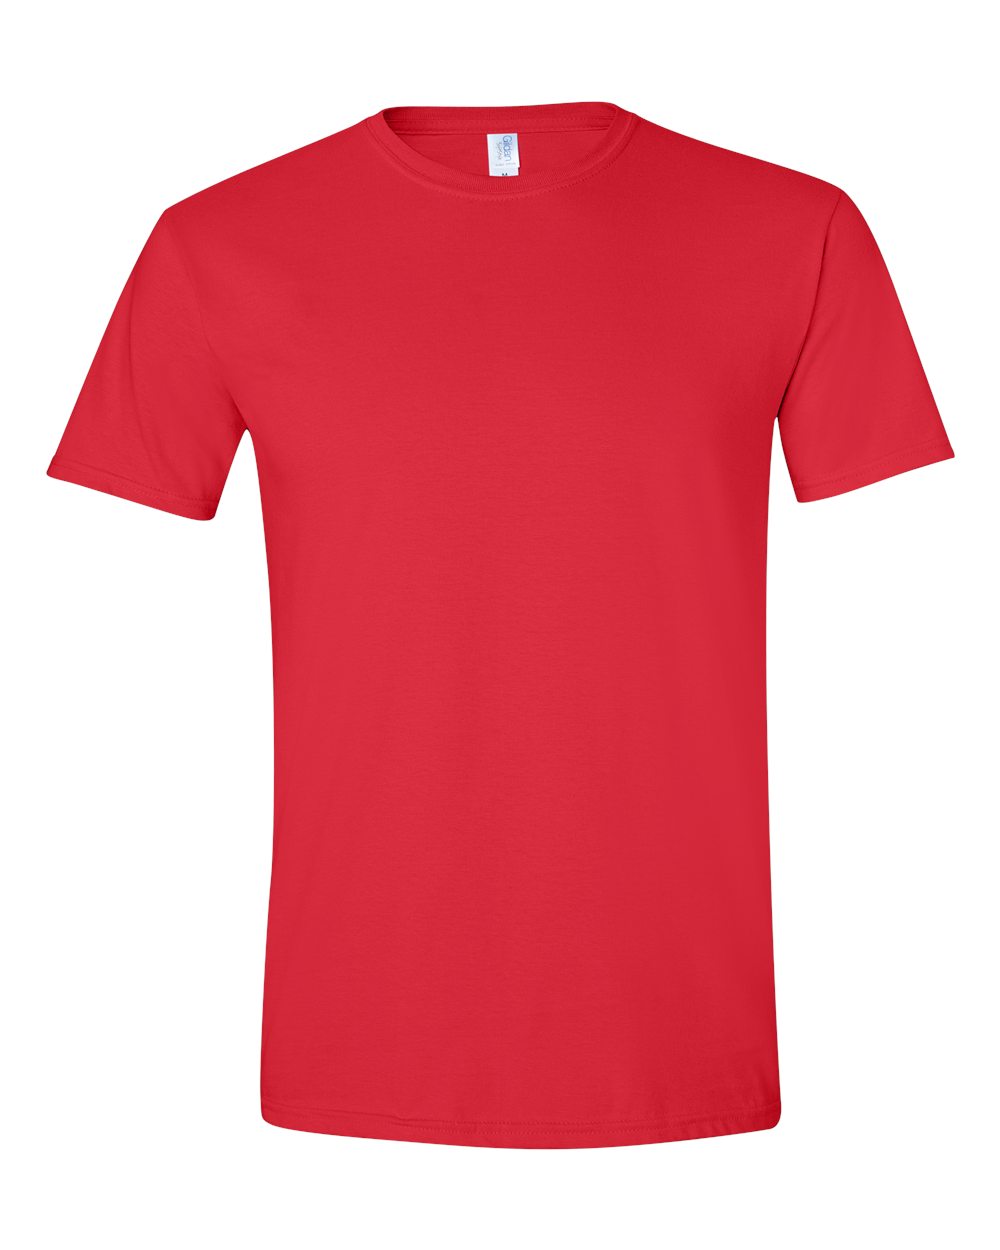 Gildan Softstyle Tee (64000) in Red